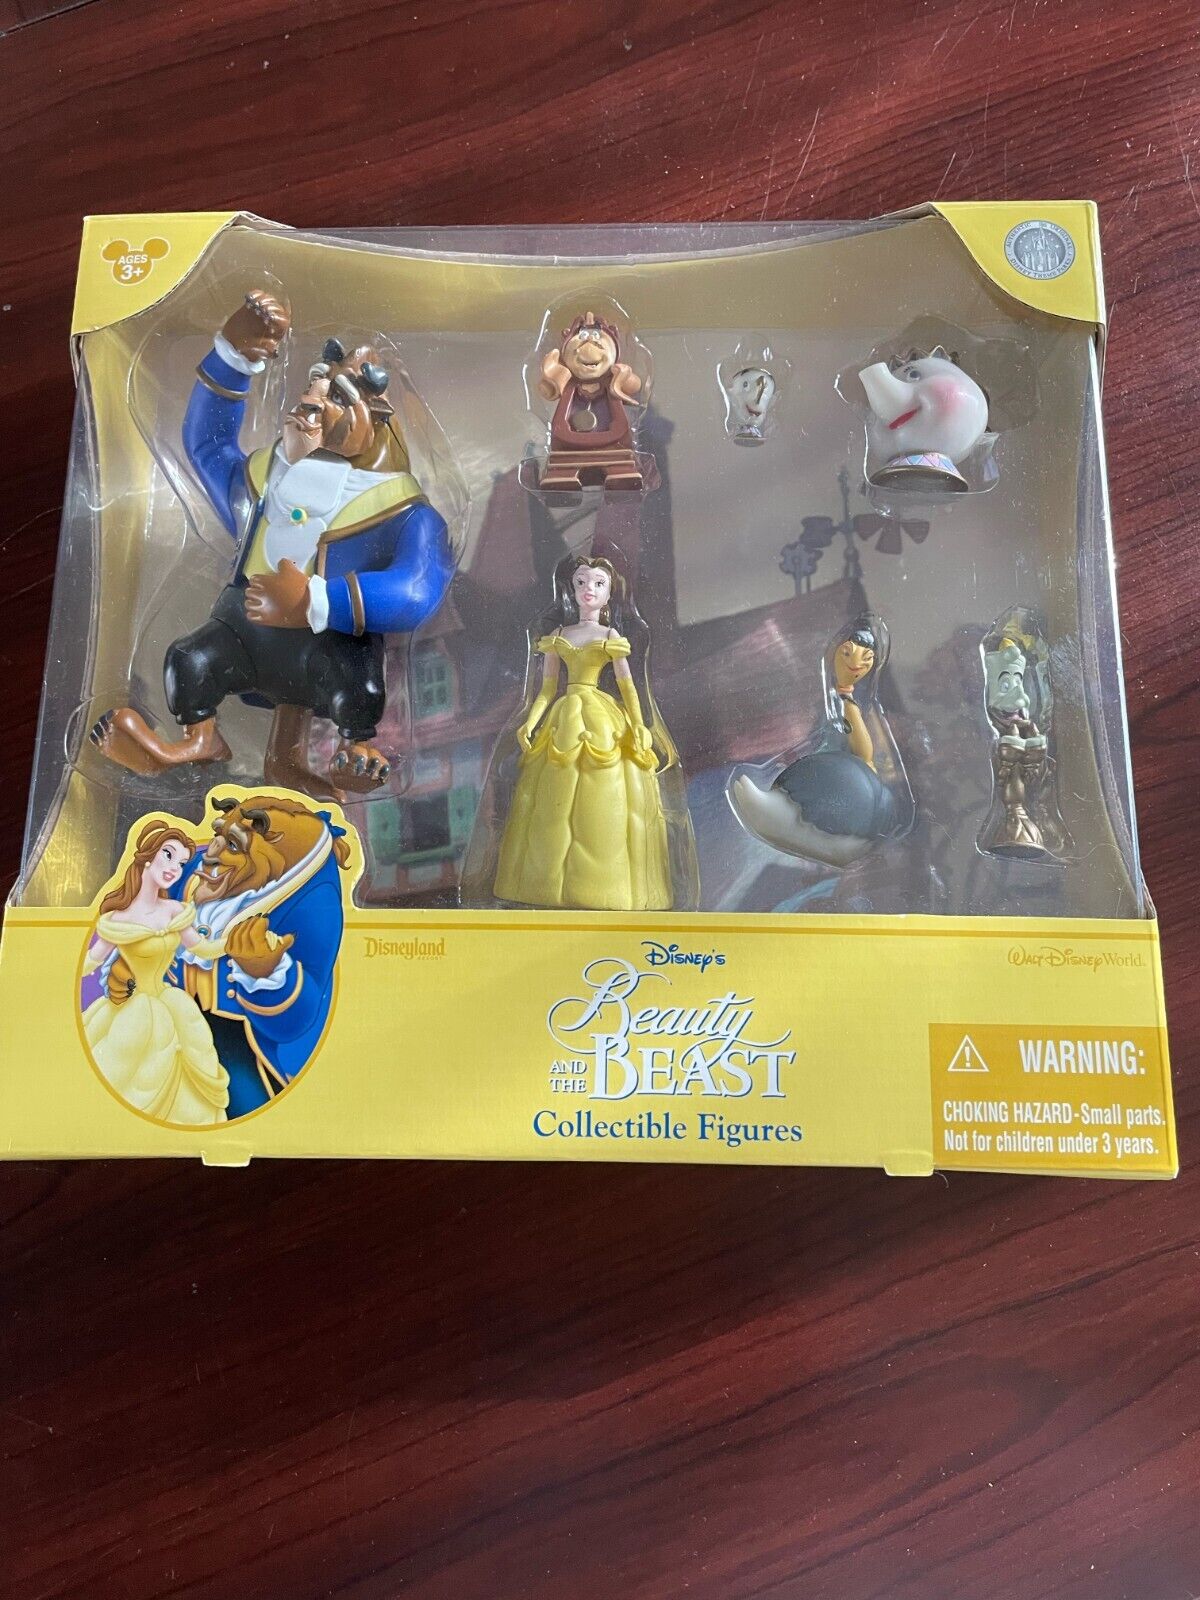 Disney\'s Beauty and the Beast collectible figure set New original box 7 figures